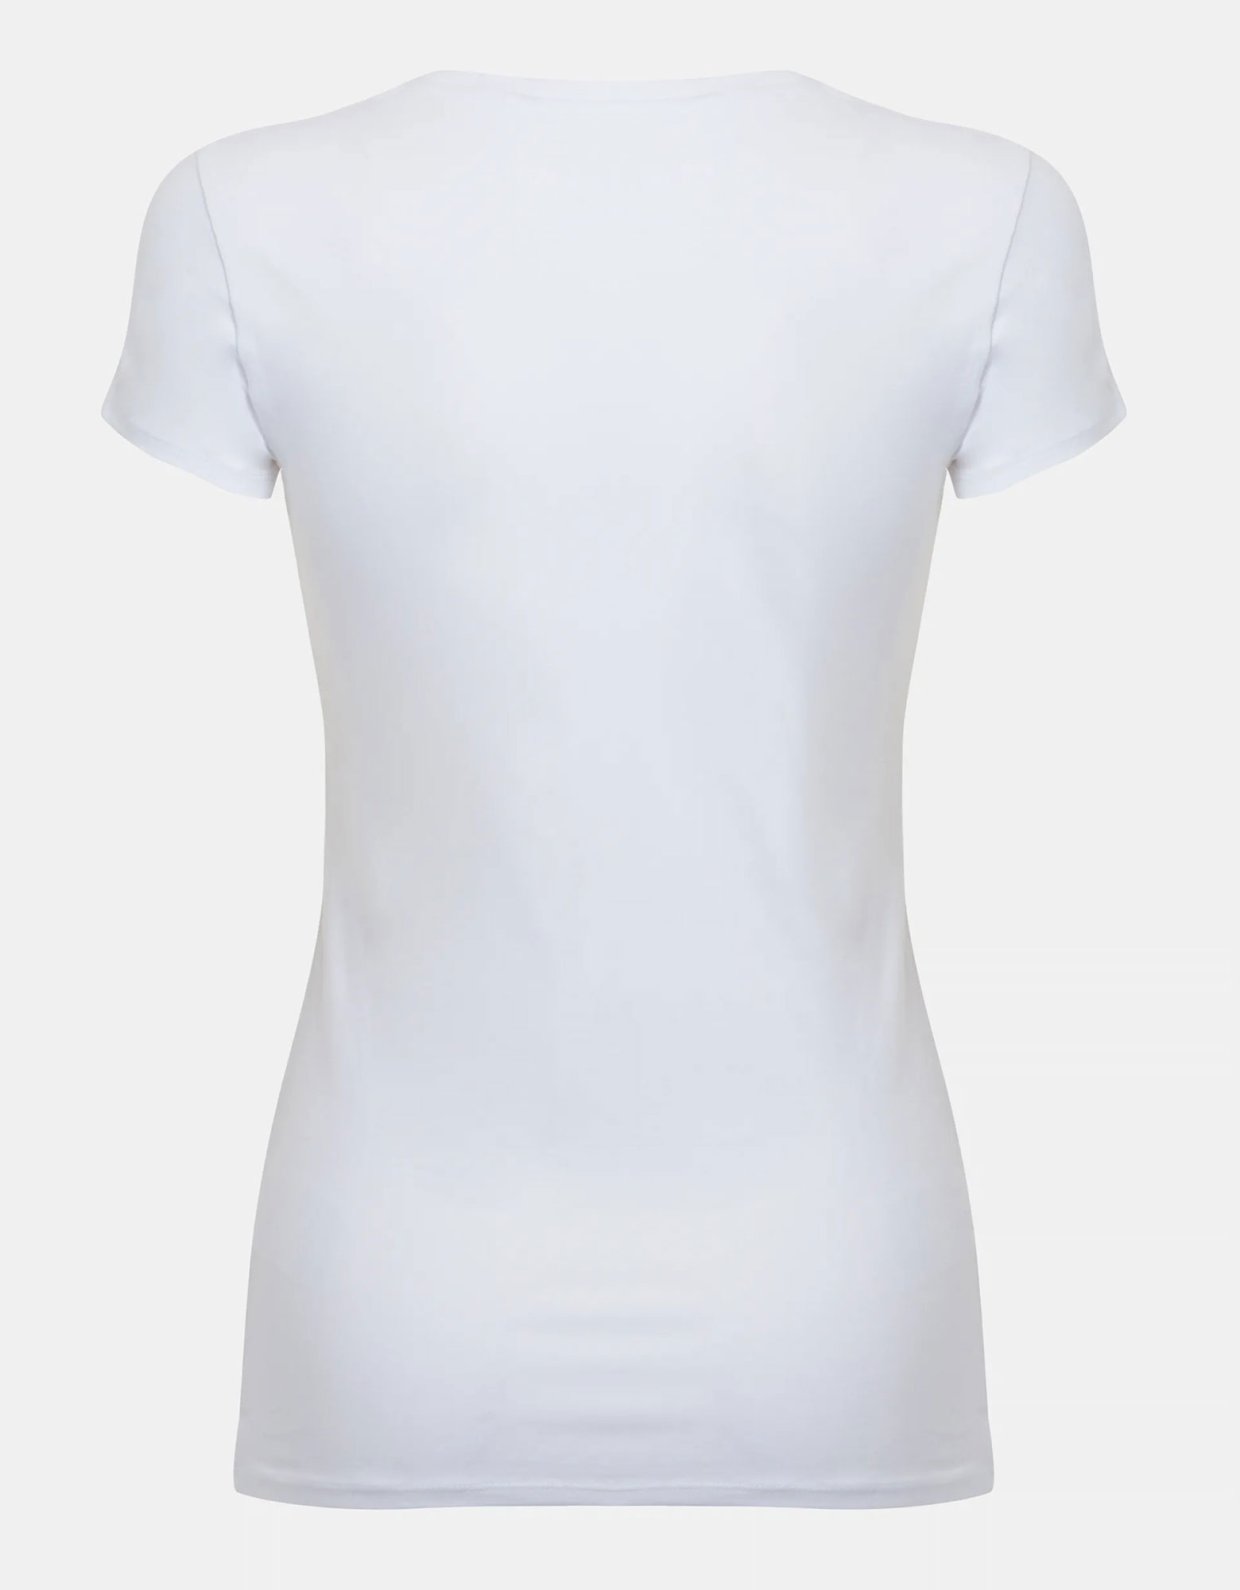 Guess Embroidered logo t-shirt white